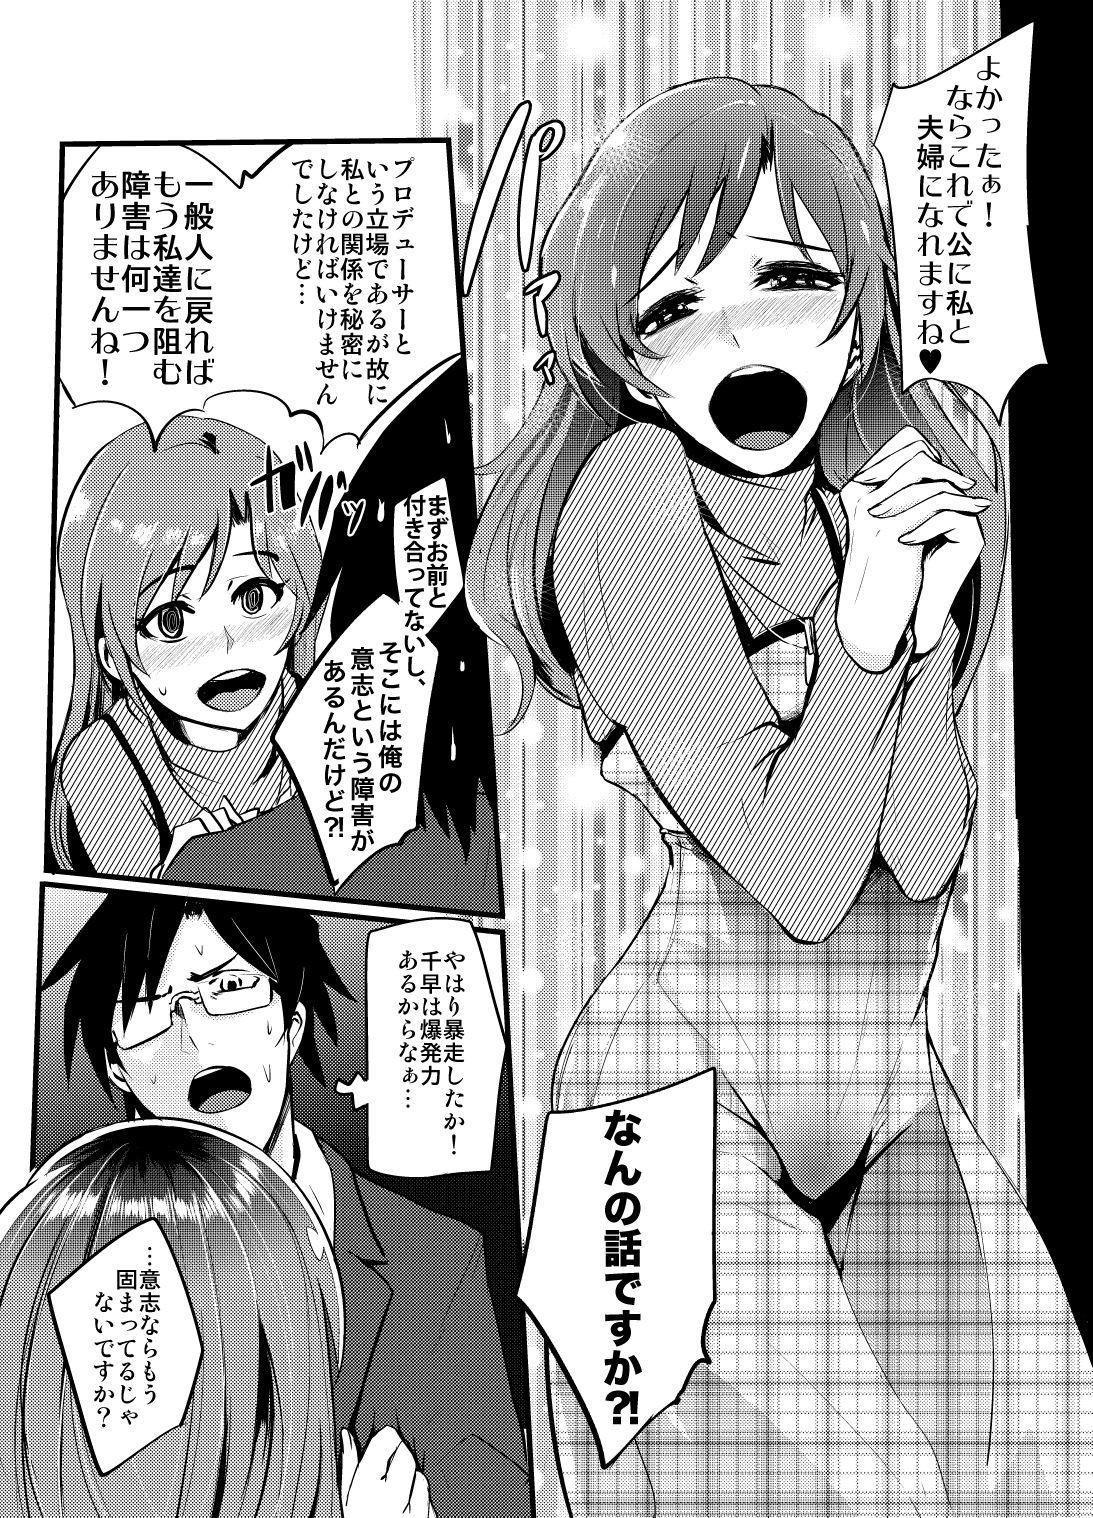 Asian THEYANDEREM@STER - The idolmaster Gaystraight - Page 4